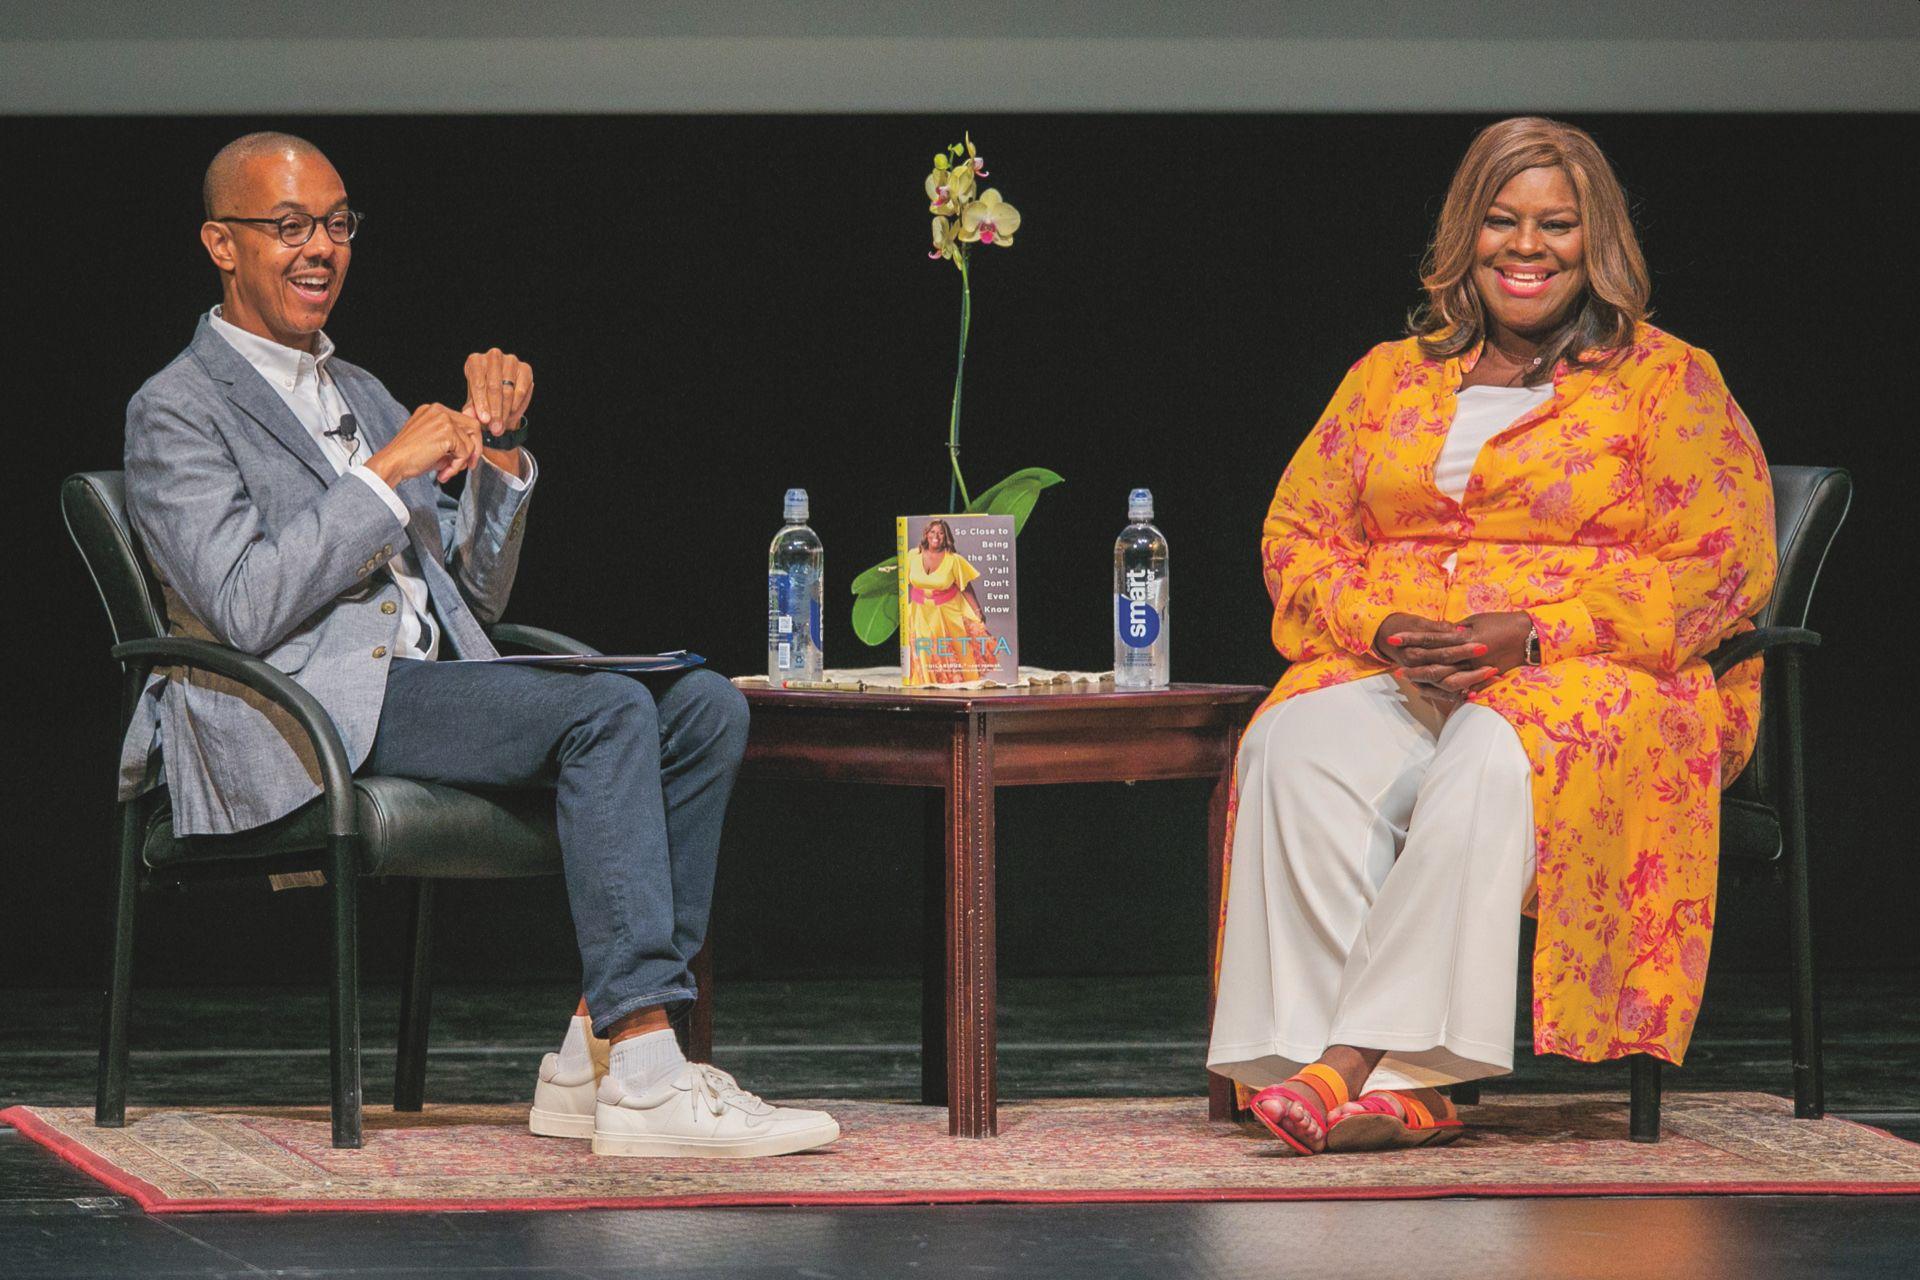 THUMBNAIL: Actress Retta class of 92 speaks with Gary Bennett on the stage.